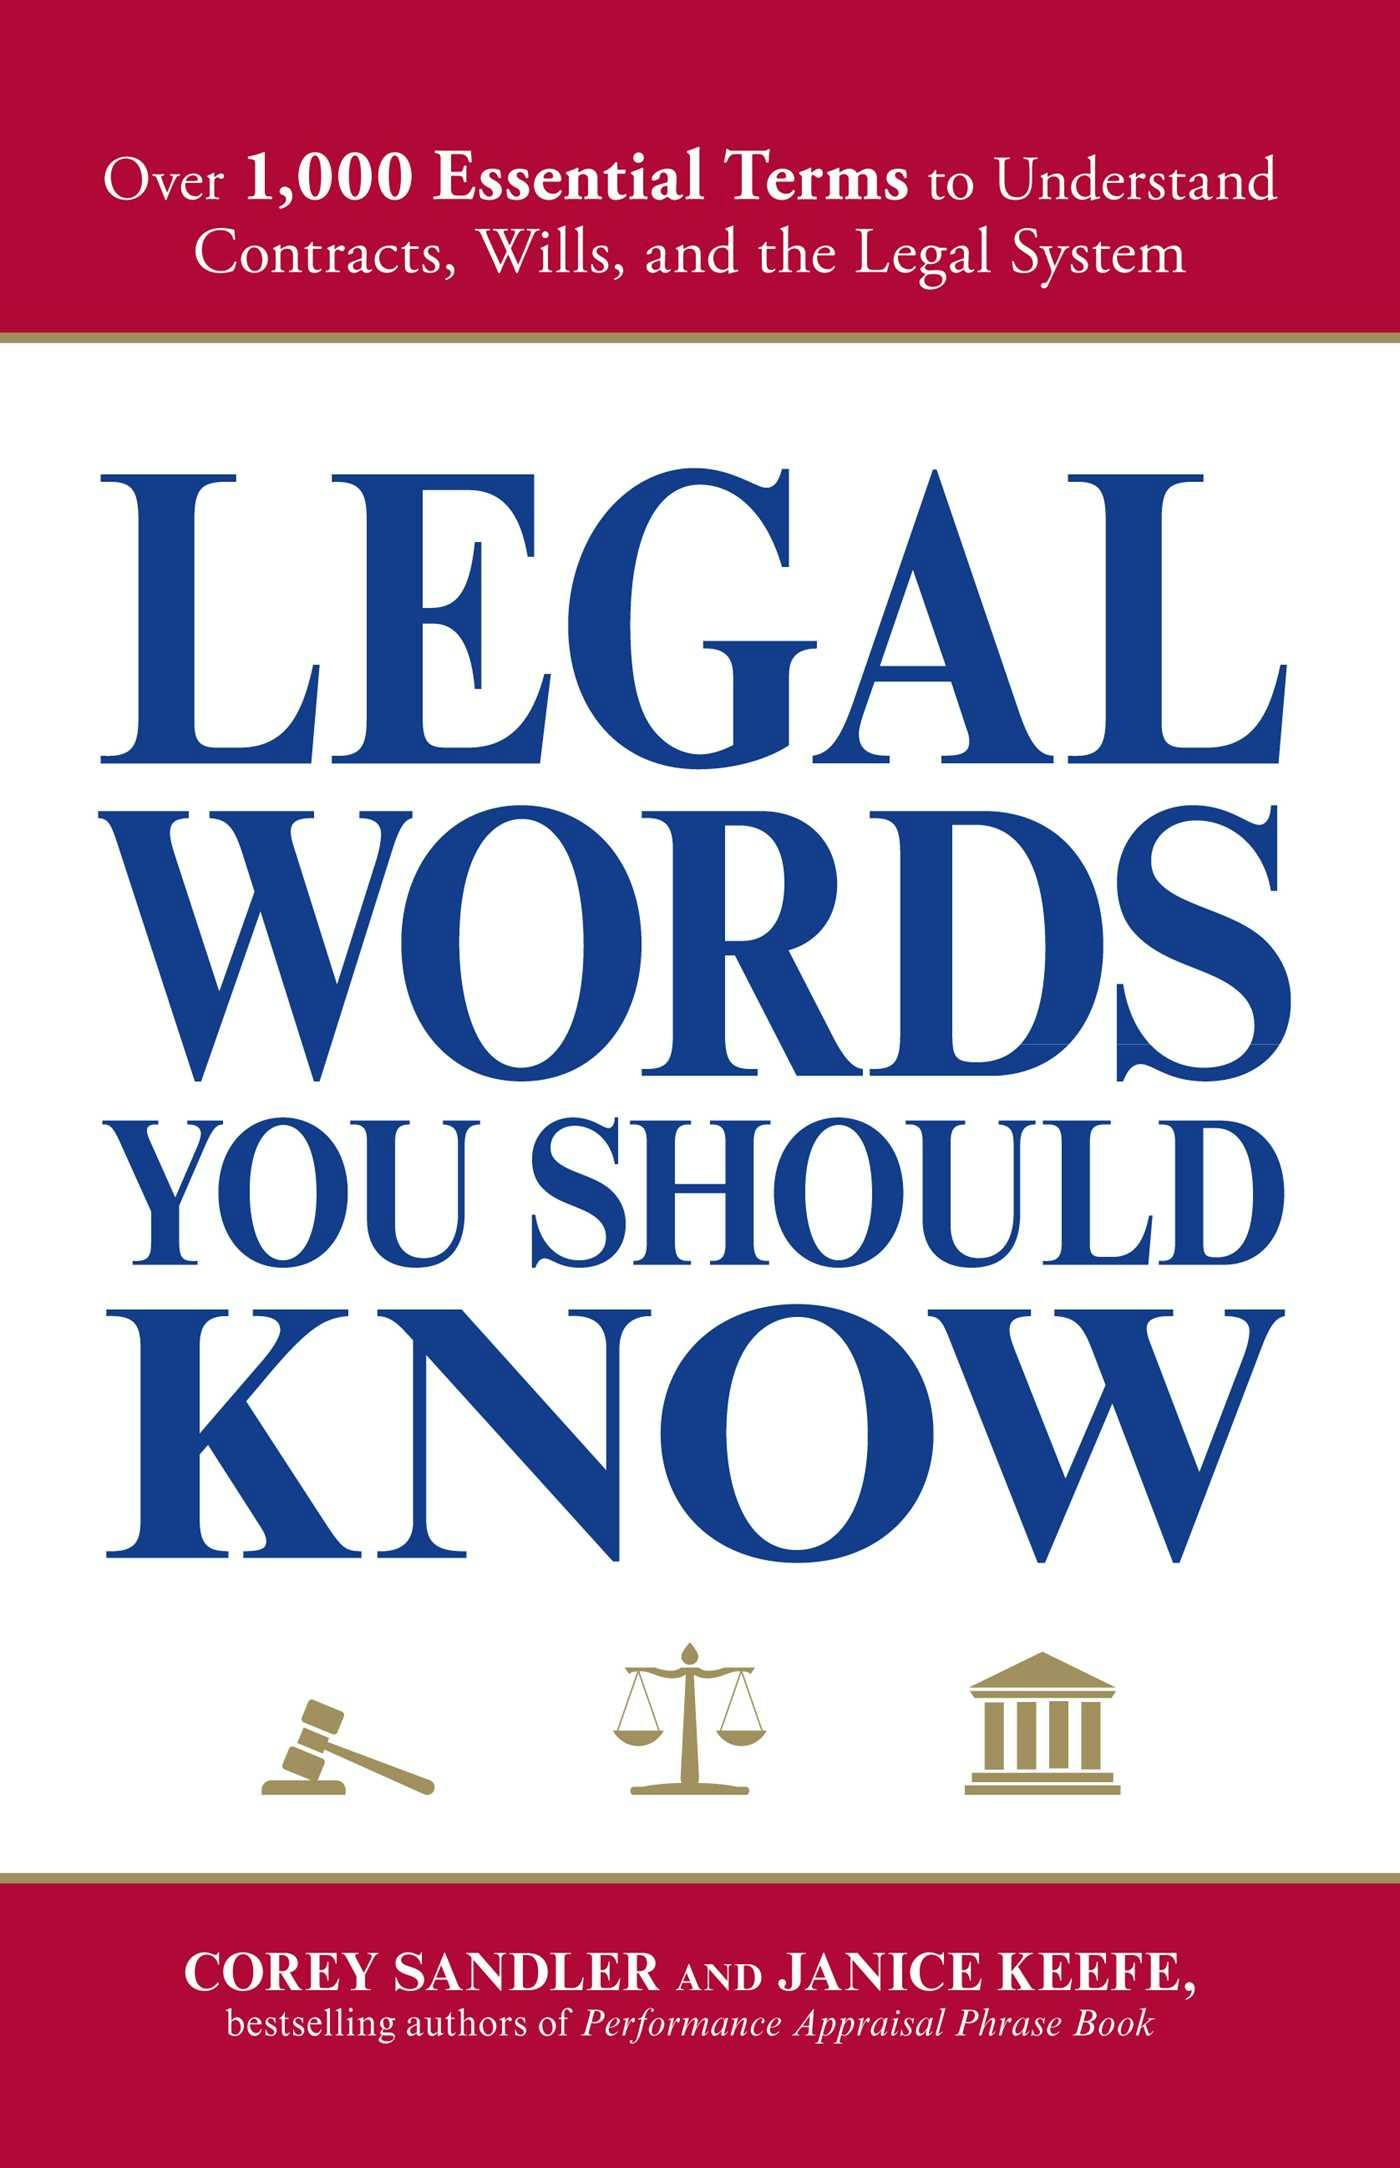 Legal Words You Should Know: Over 1,000 Essential Terms to Understand Contracts, Wills, and the Legal System - Corey Sandler, Janice Keefe